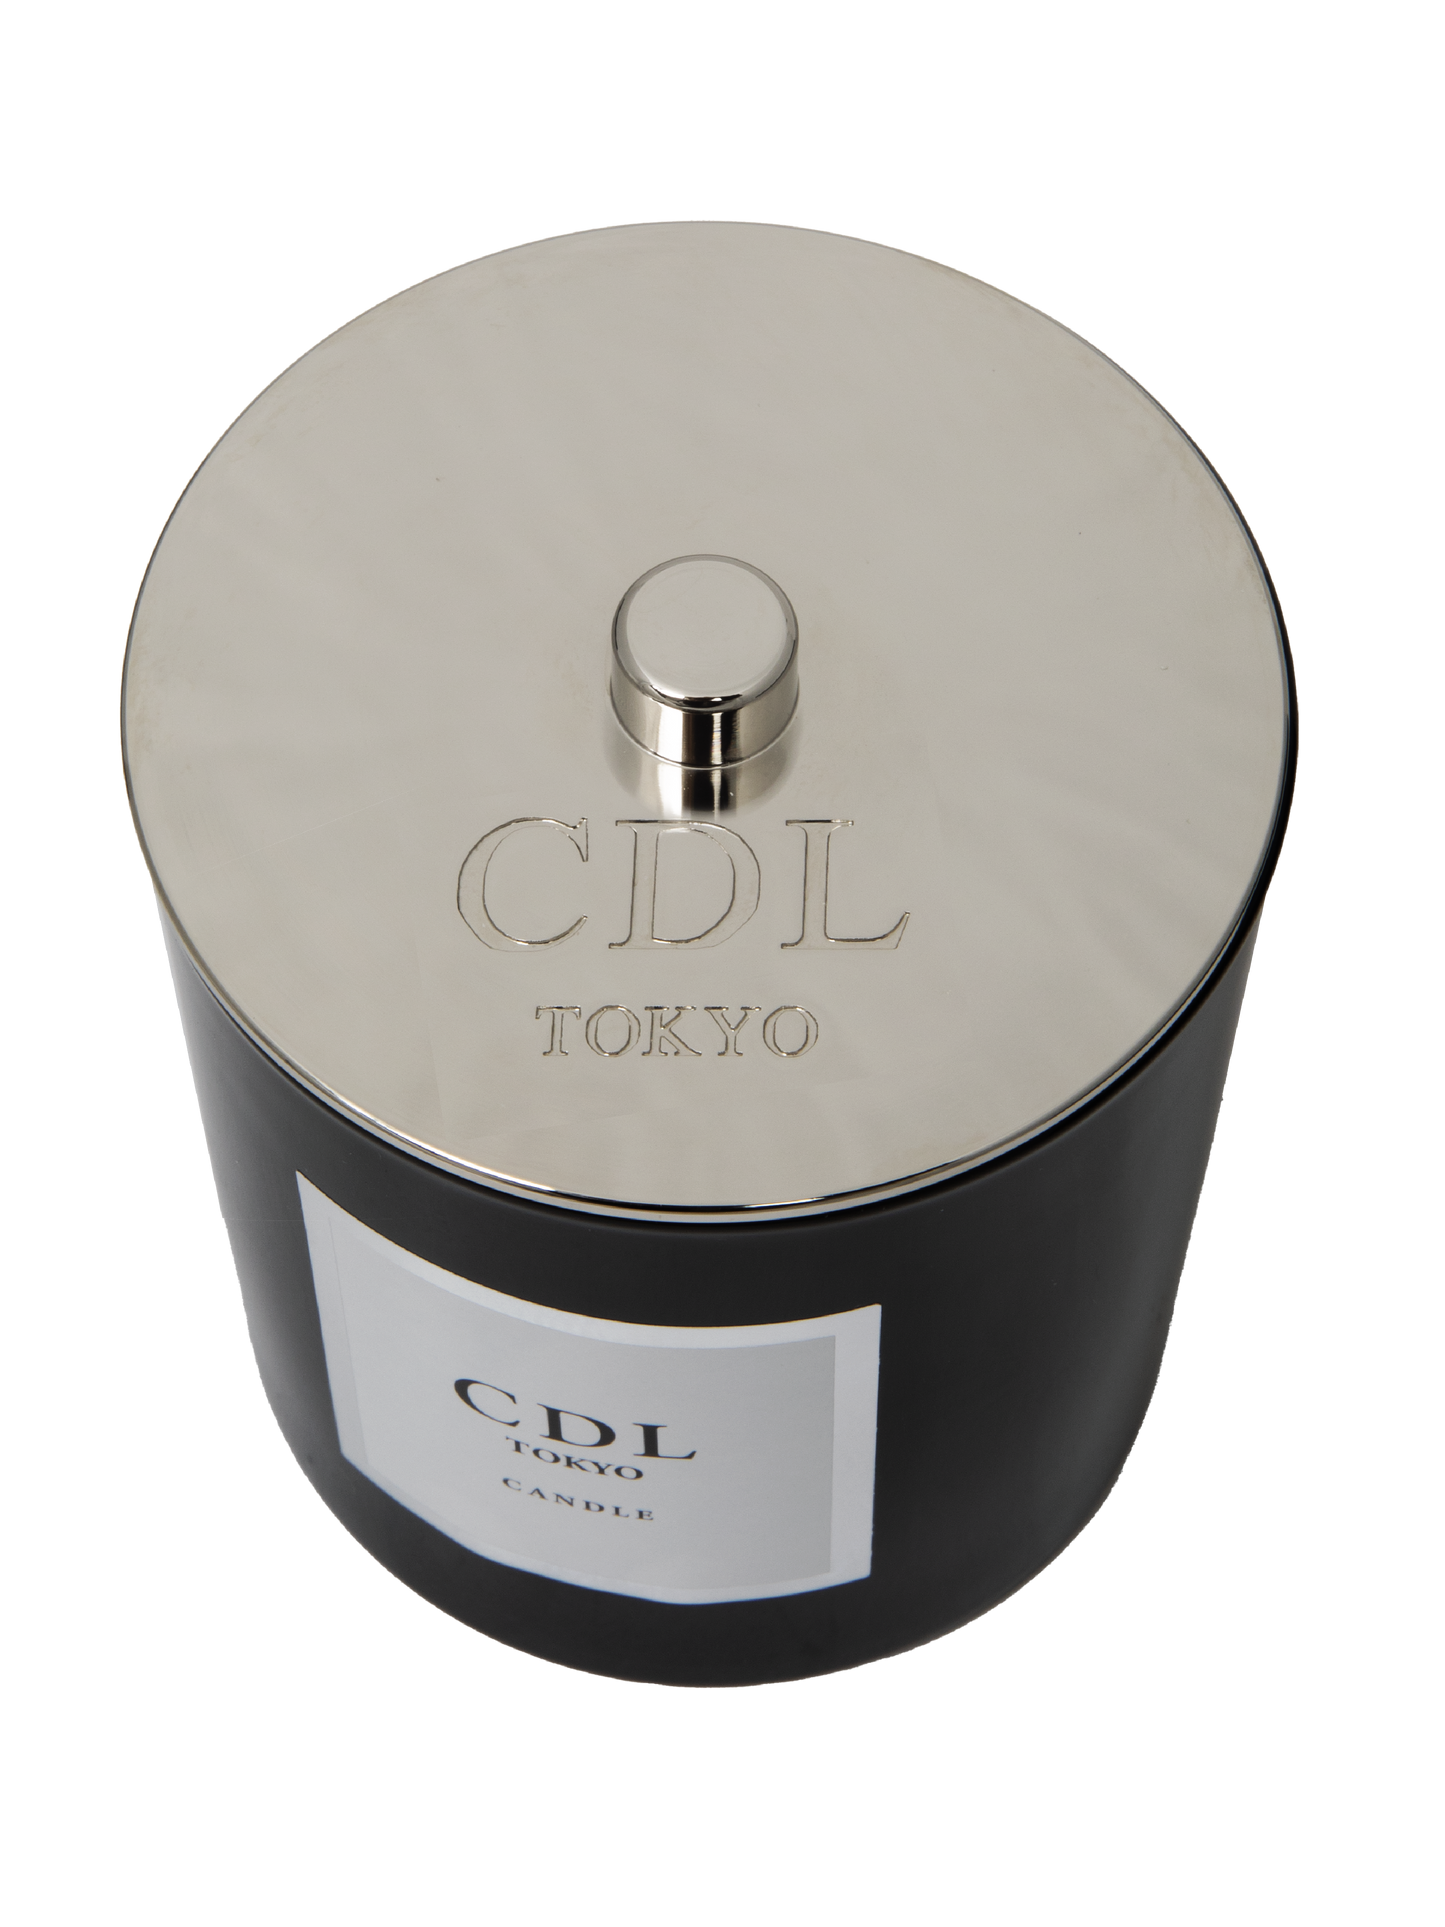 CDL Candle